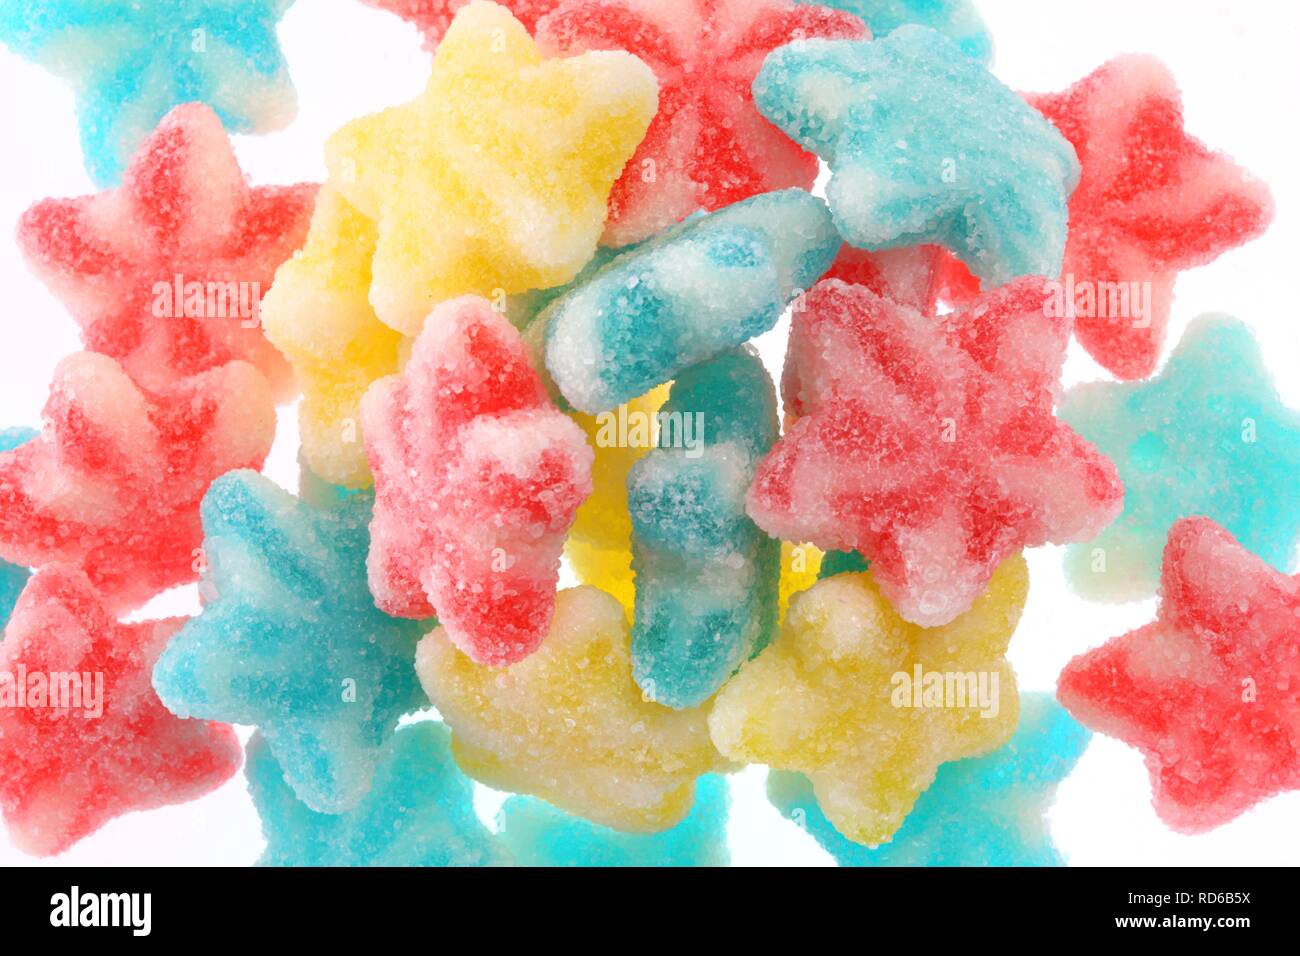 Fruit gums in various colours with a fine sugar coating Stock Photo